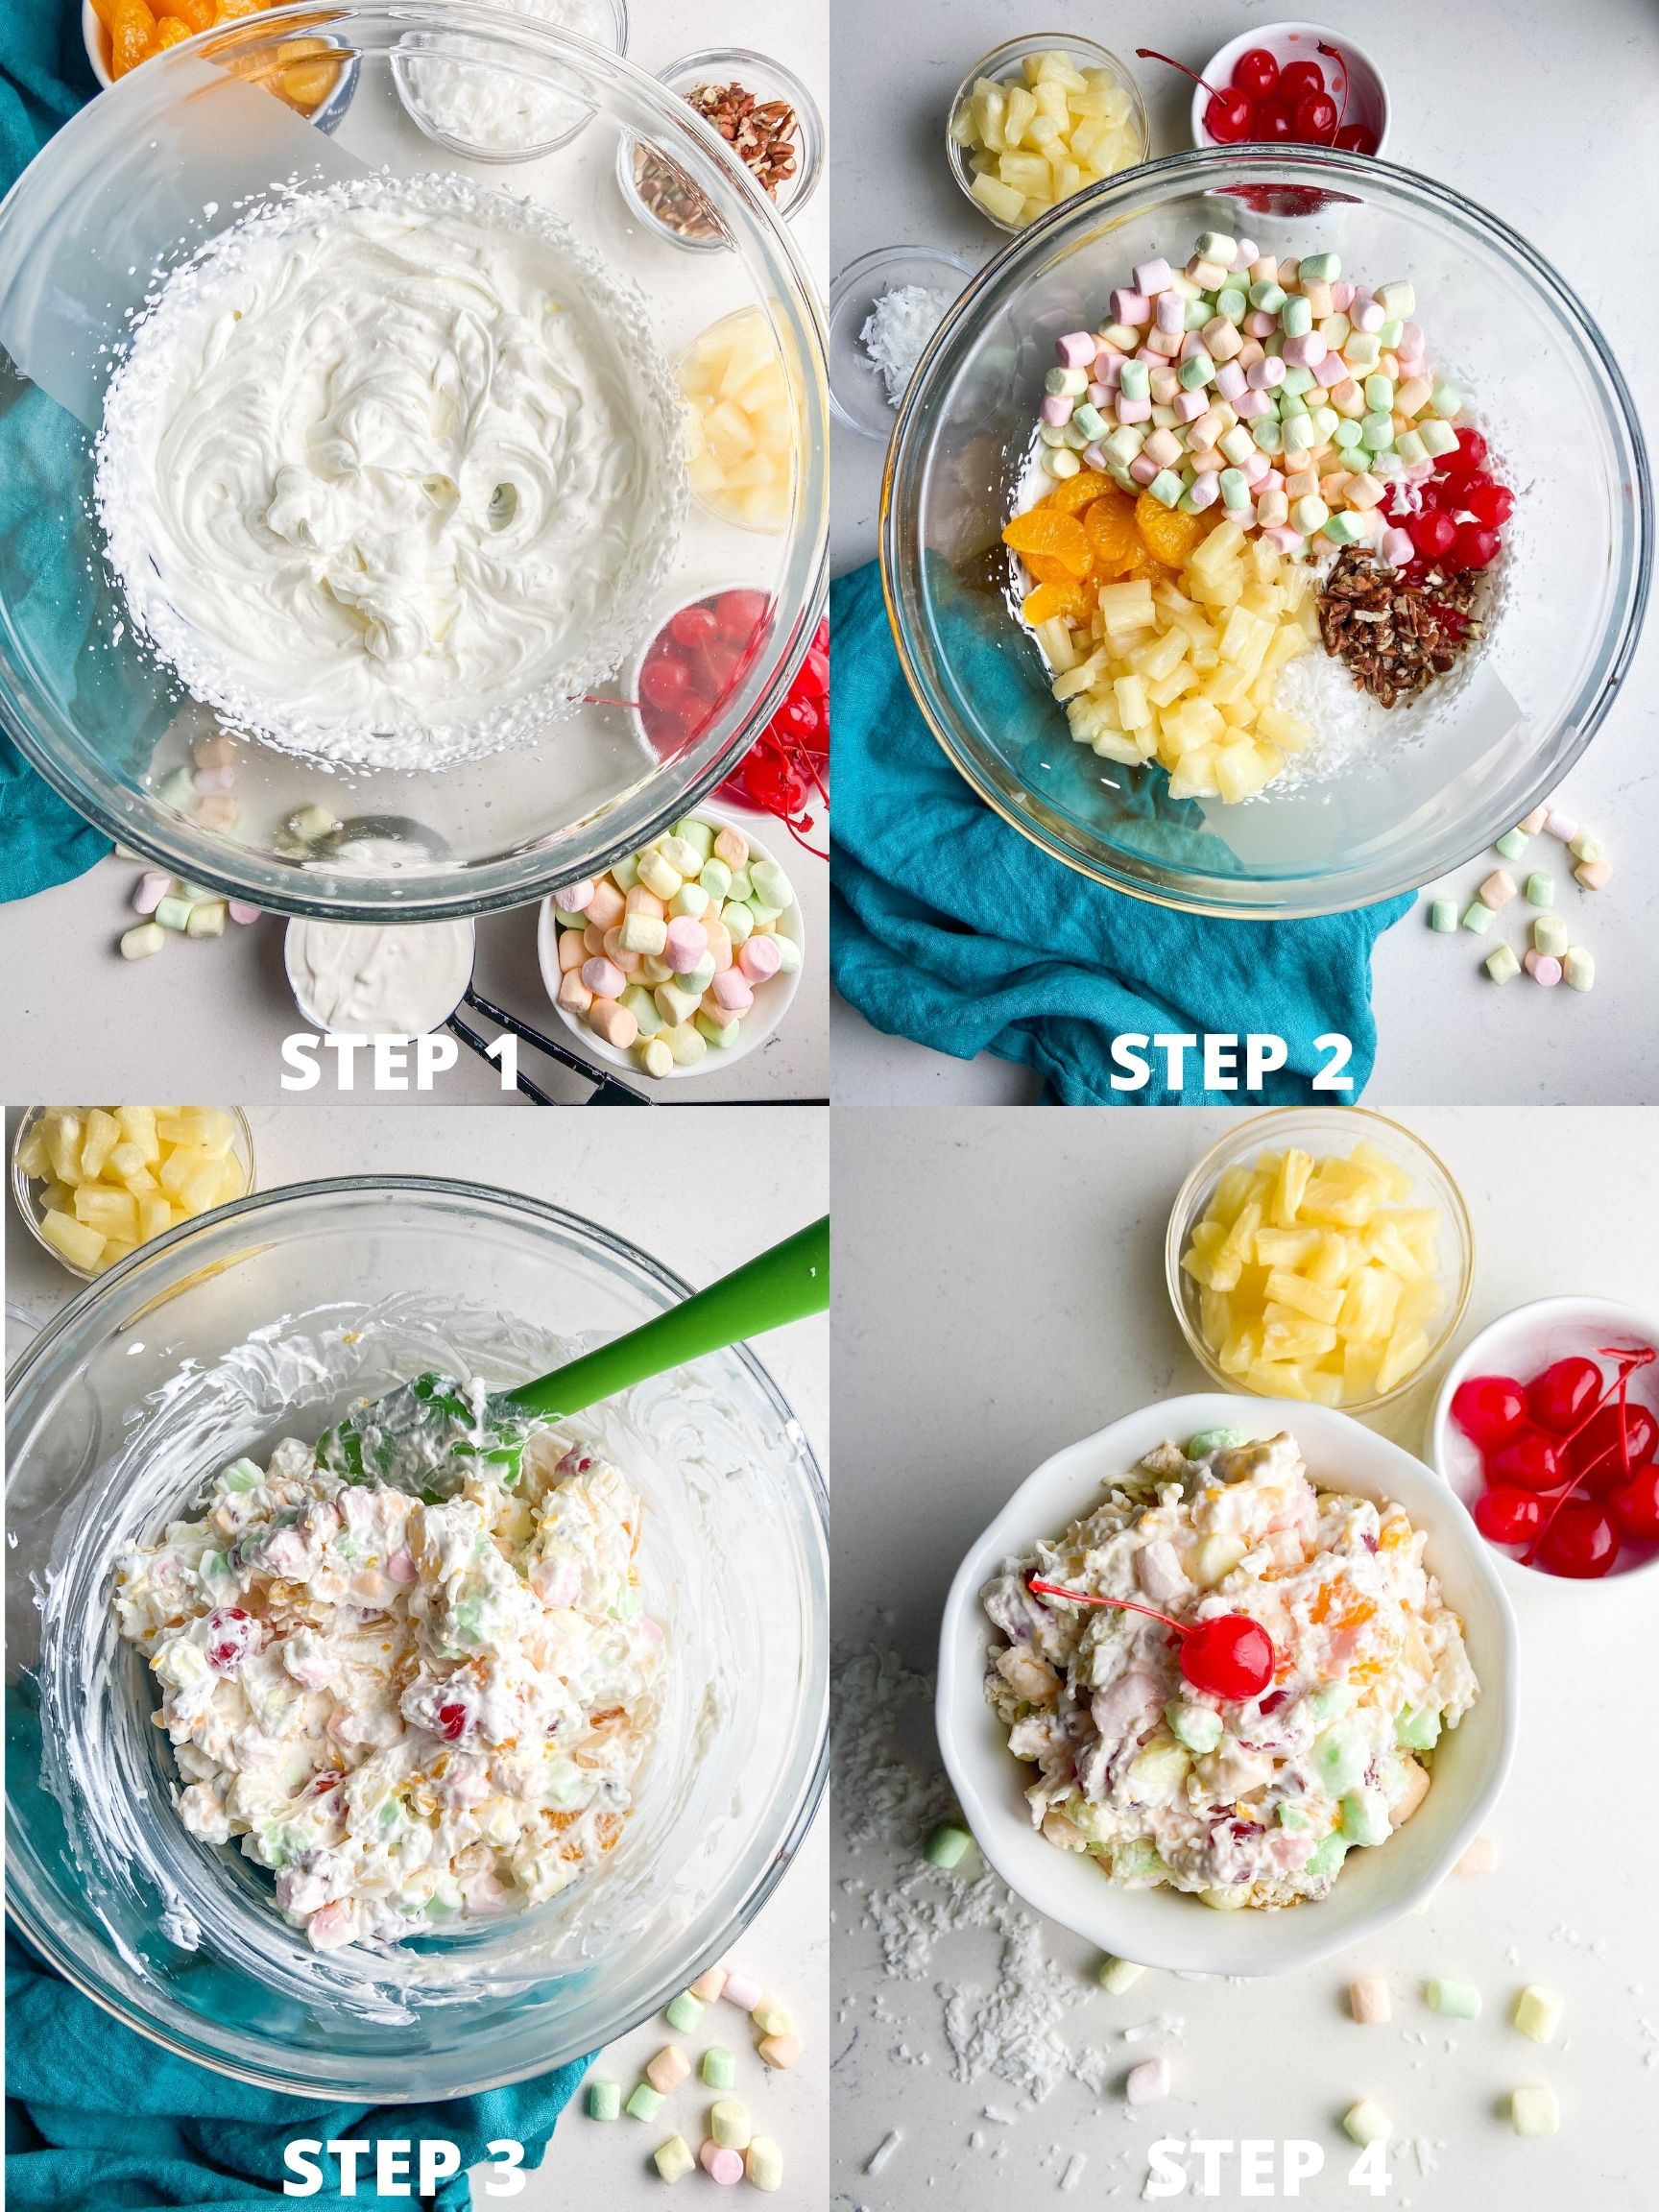 Step by Step photos for making ambrosia salad